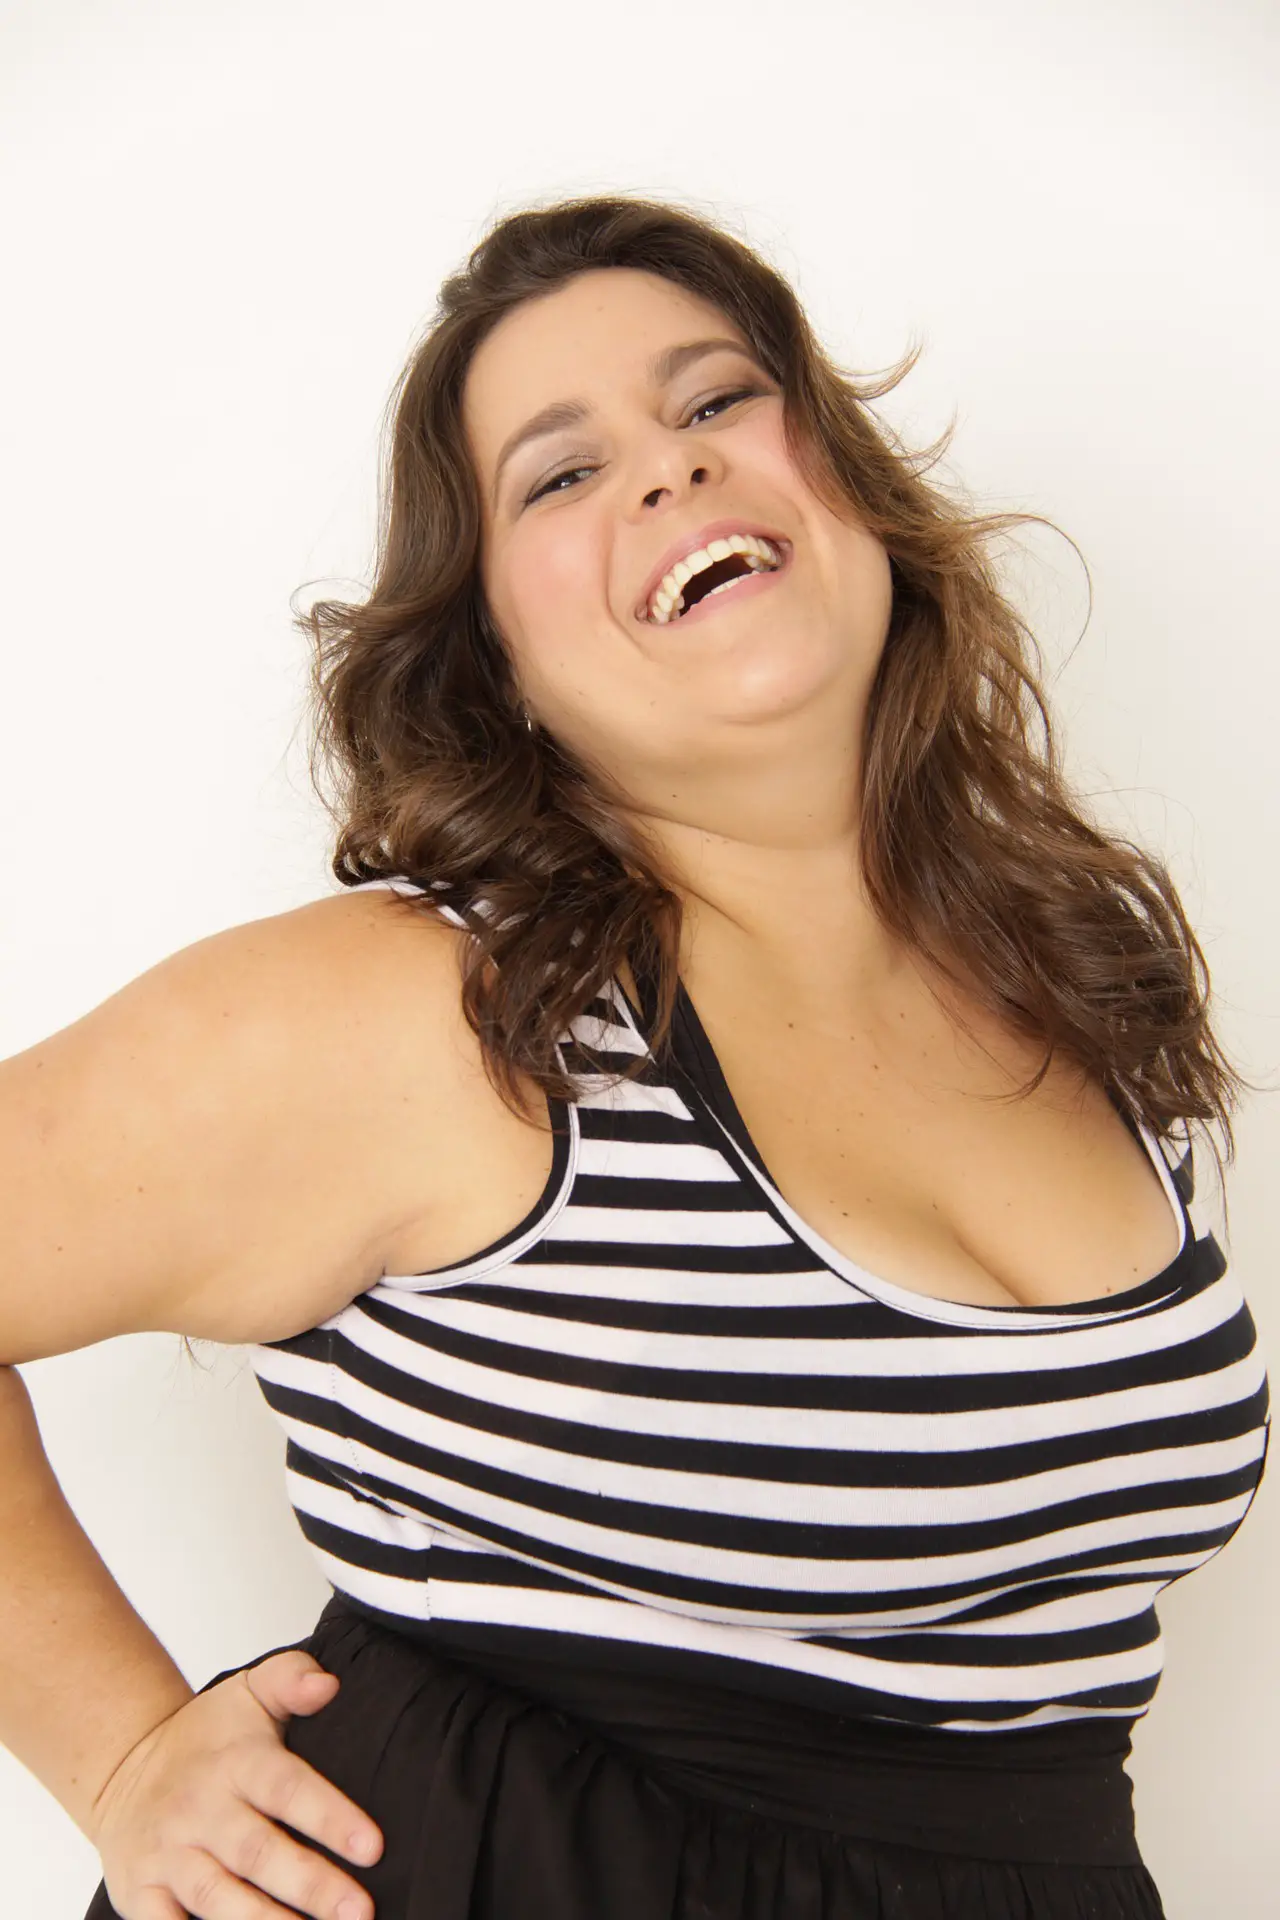 Rising Obesity Rates Linked to Plus-Sized Models – New Study Shows